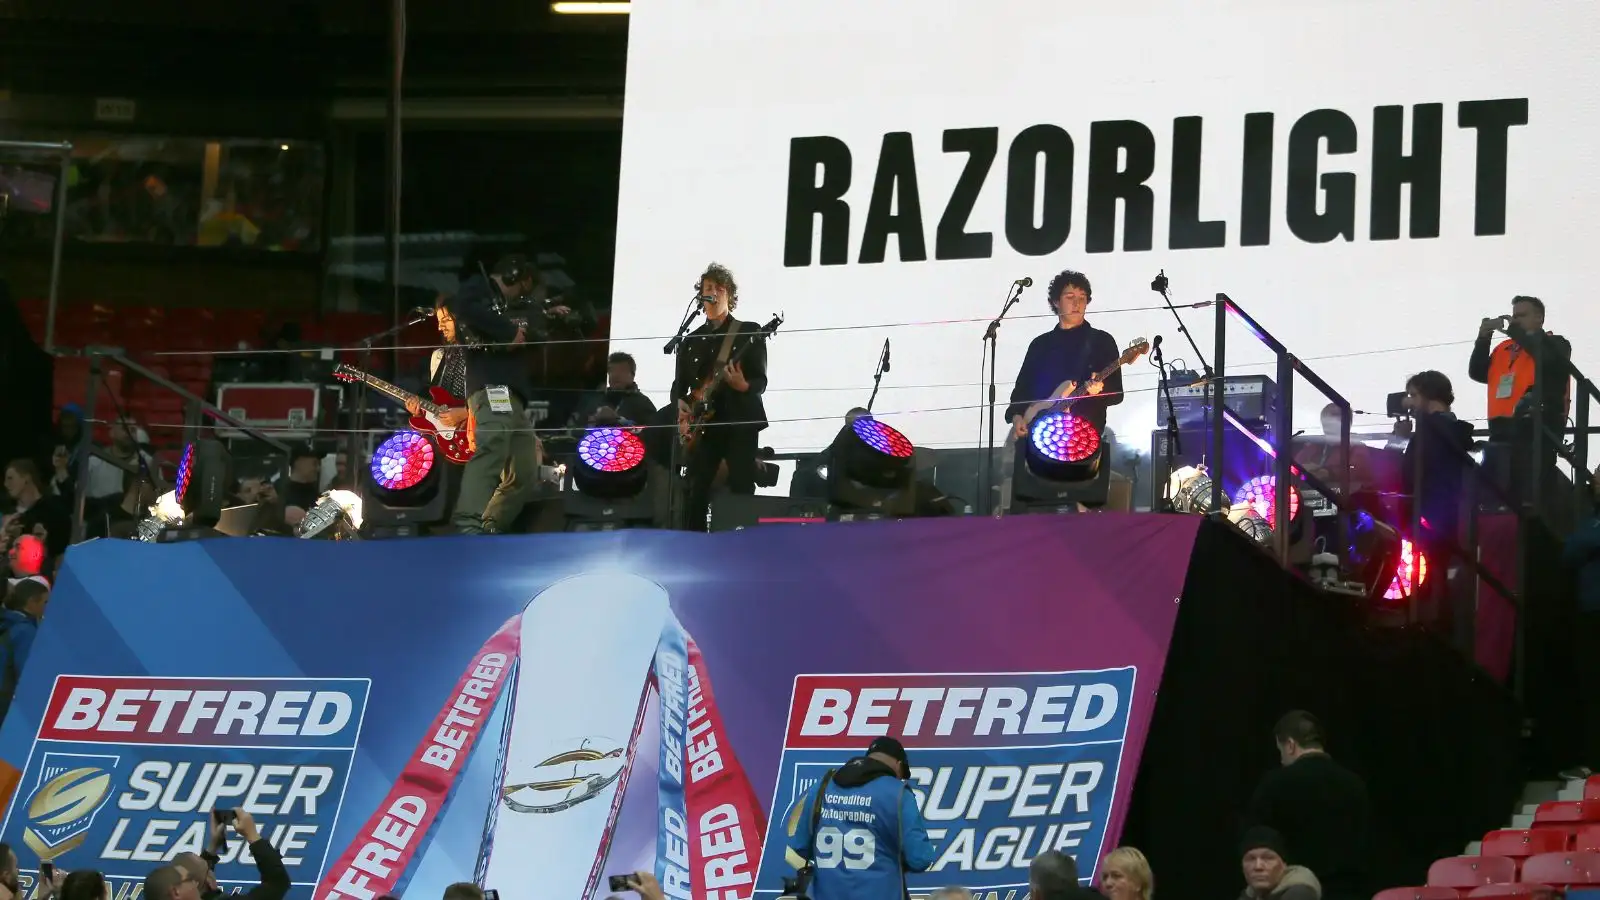 Super League confirm Grand Final entertainment with indie band set to rock Old Trafford; Ticket sales already soaring